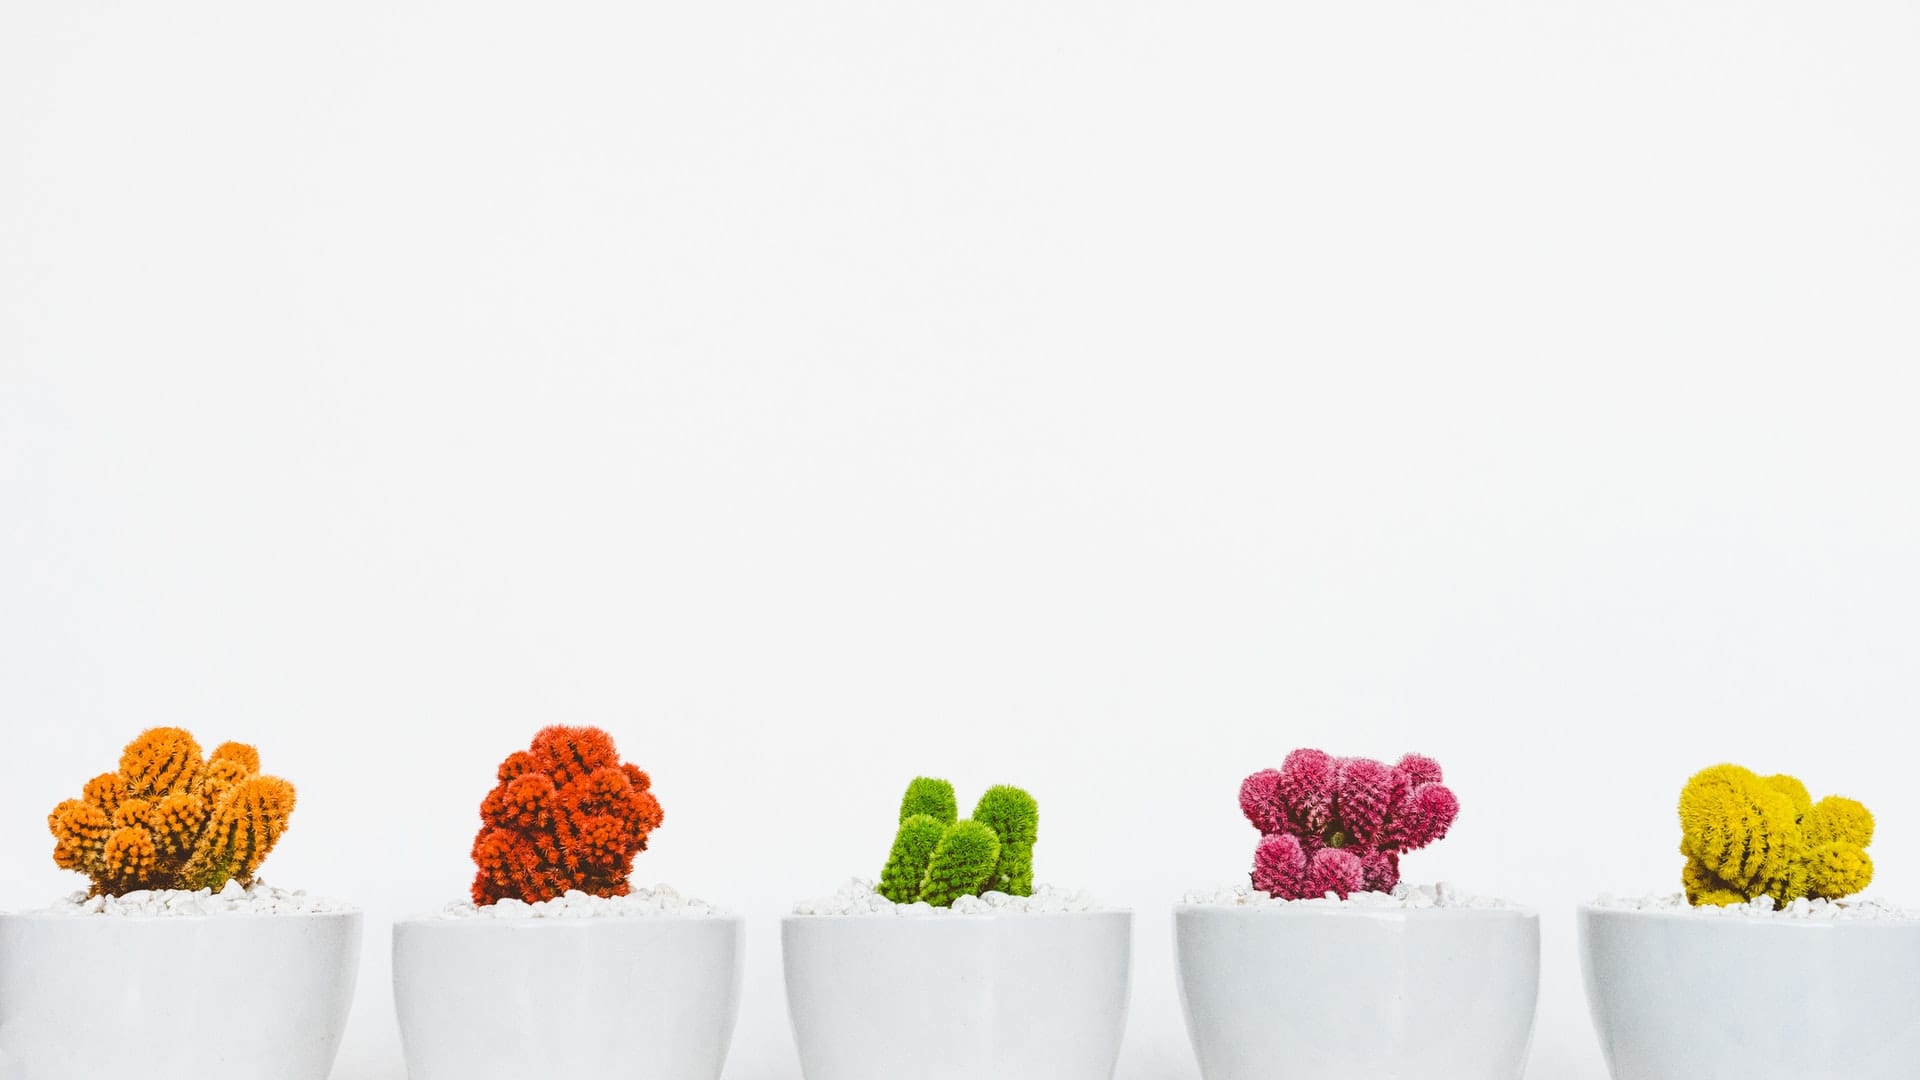 Flowers in colors from left to right of orange, red, green, purple, and yellow at the equal distance on the bottom of the white background